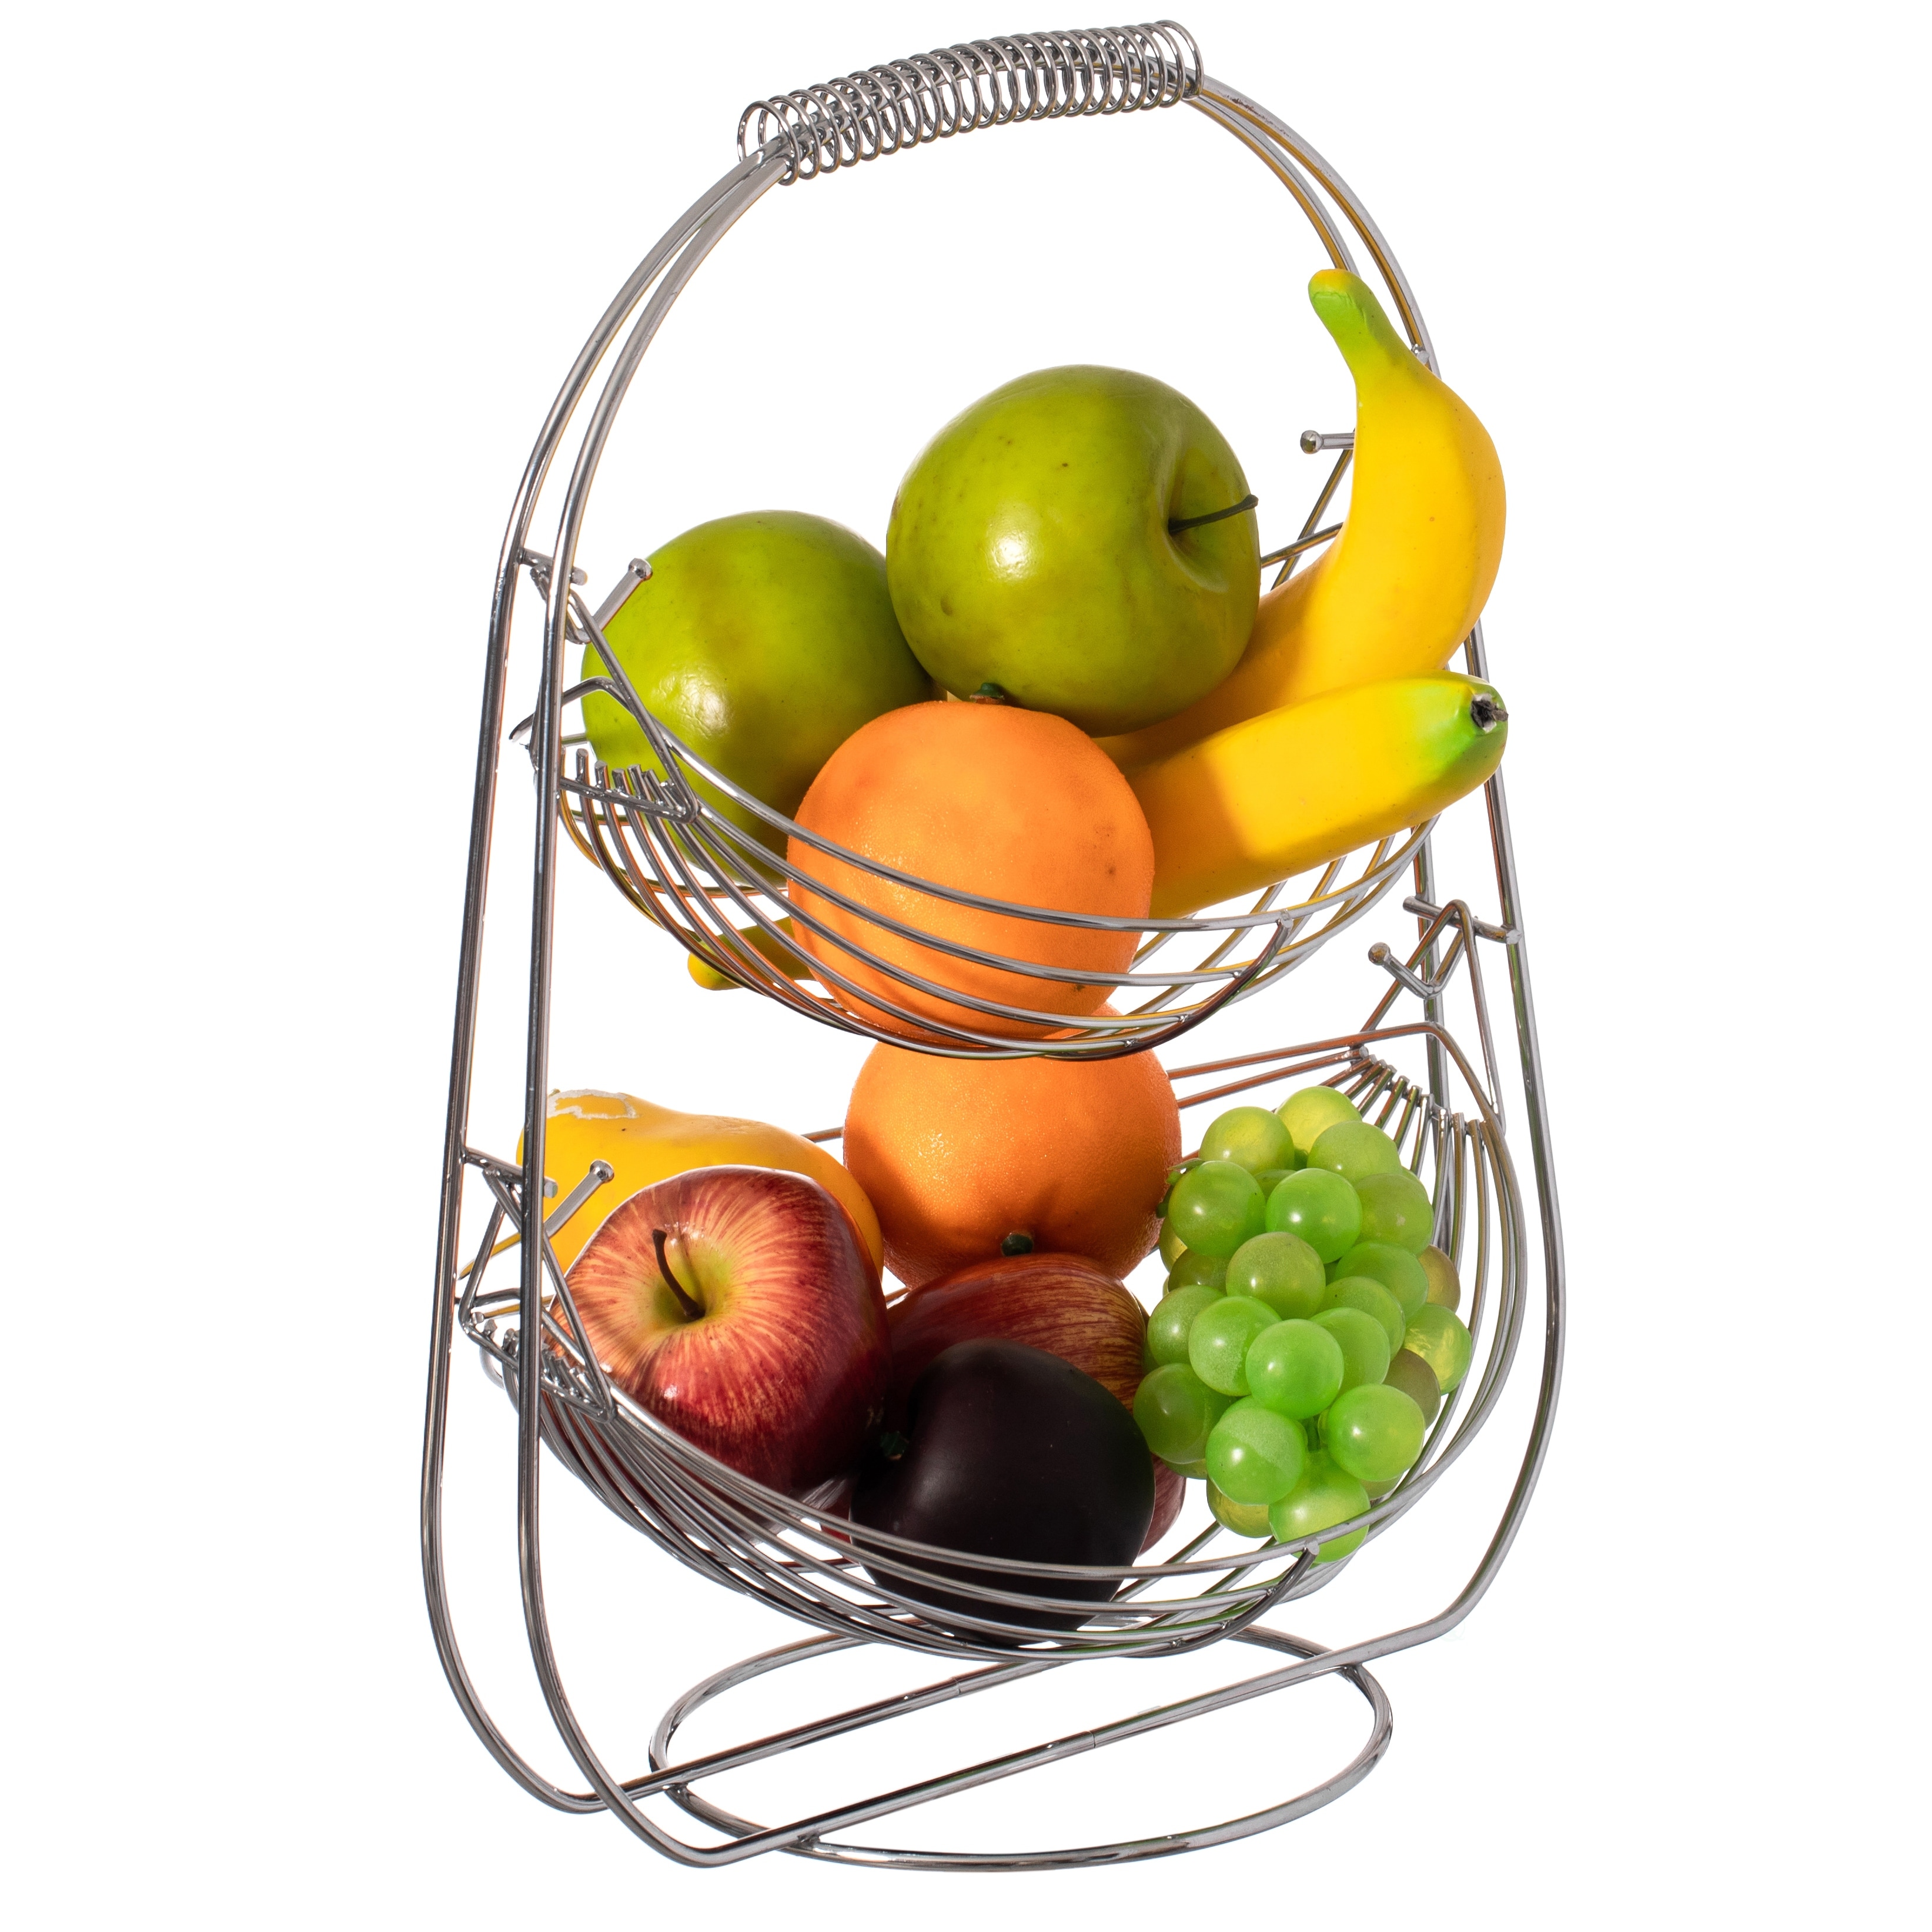 https://ak1.ostkcdn.com/images/products/is/images/direct/36c114ed13be5c212841727f5a4ea7ac626ae0ff/2-Tier-Metal-Fruit-Holder-Swing-Basket-for-Kitchen-Detachable-Countertop-Vegetables-Storage-Organizer-with-Display-Hammock-Stand.jpg